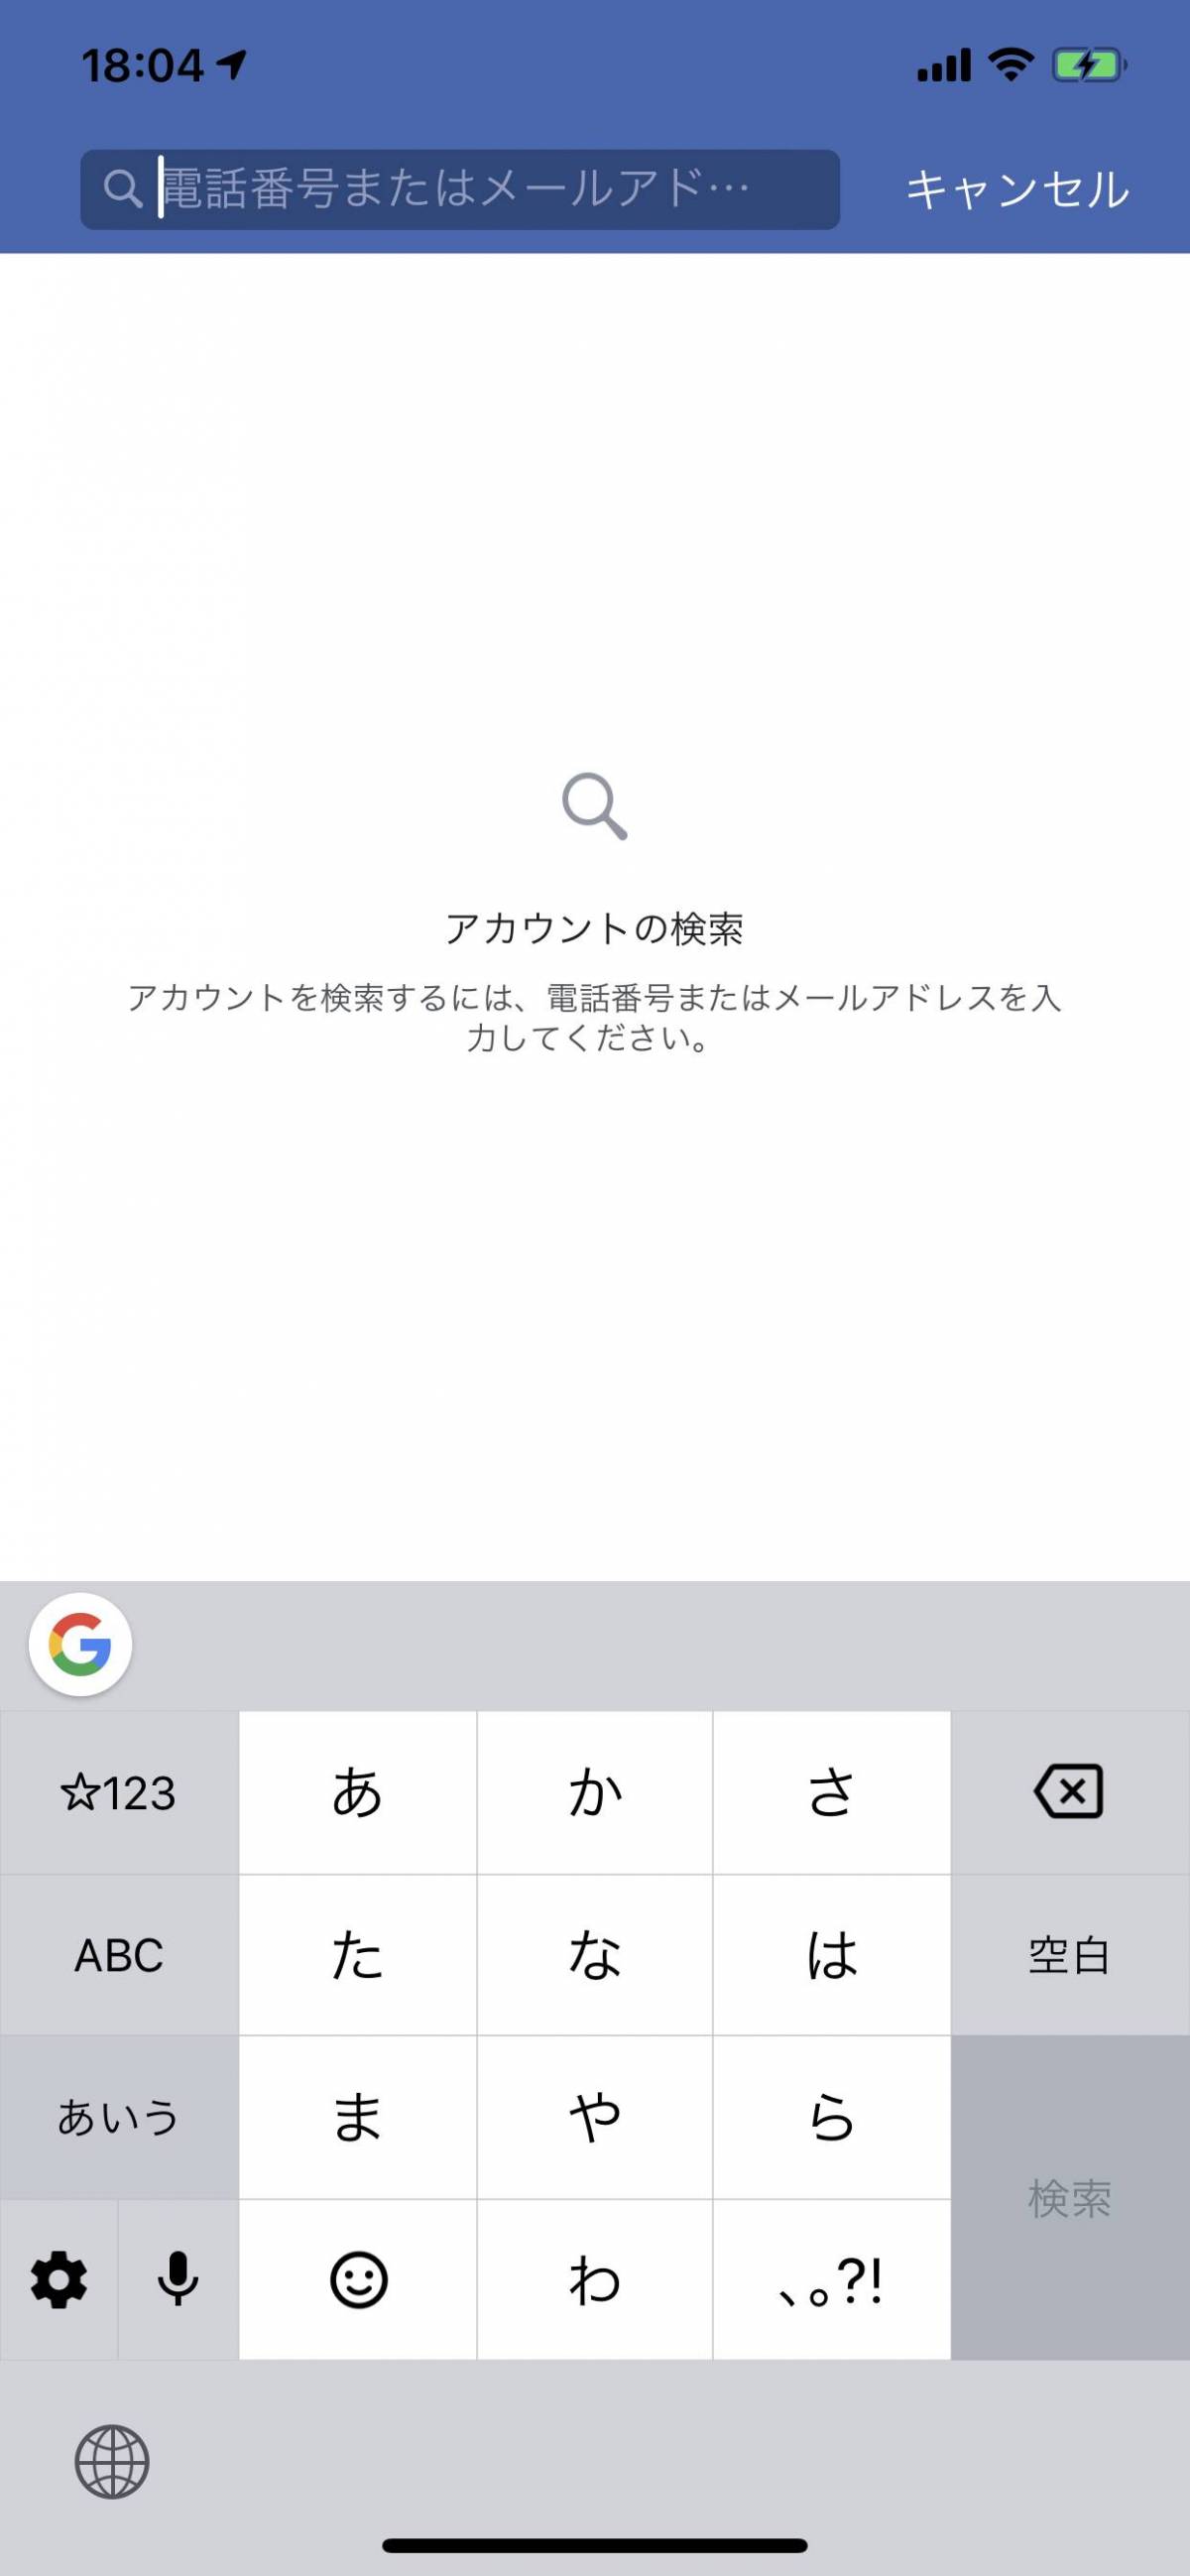 Facebook 機種変更でアカウントを引き継ぐ方法 Iphone Android Appliv Topics